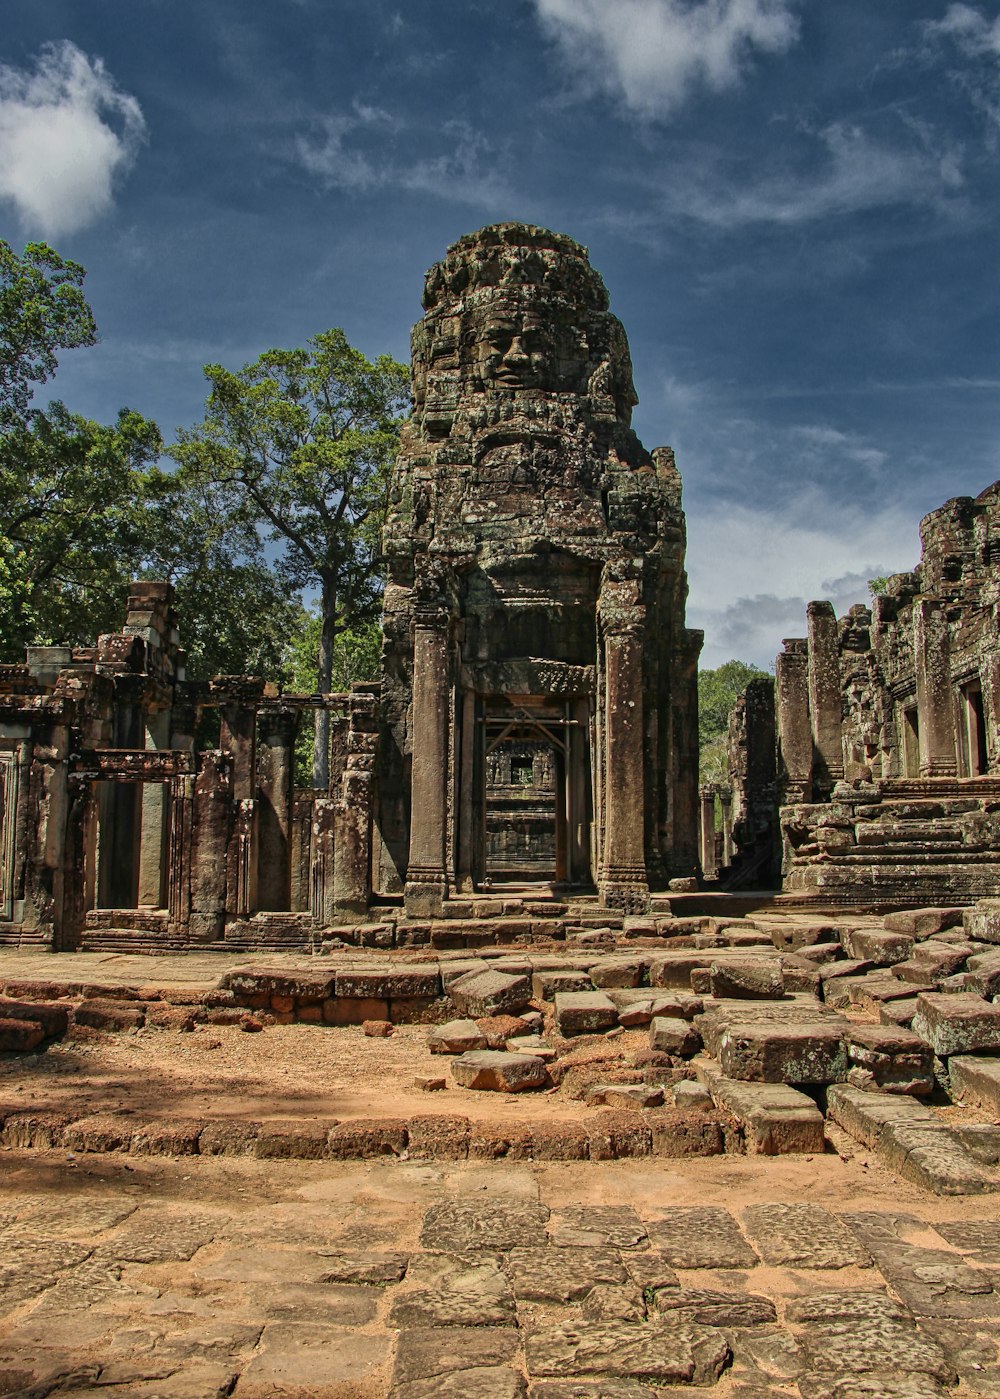 a stone structure with trees and rocks around it with Angkor Wat in the background